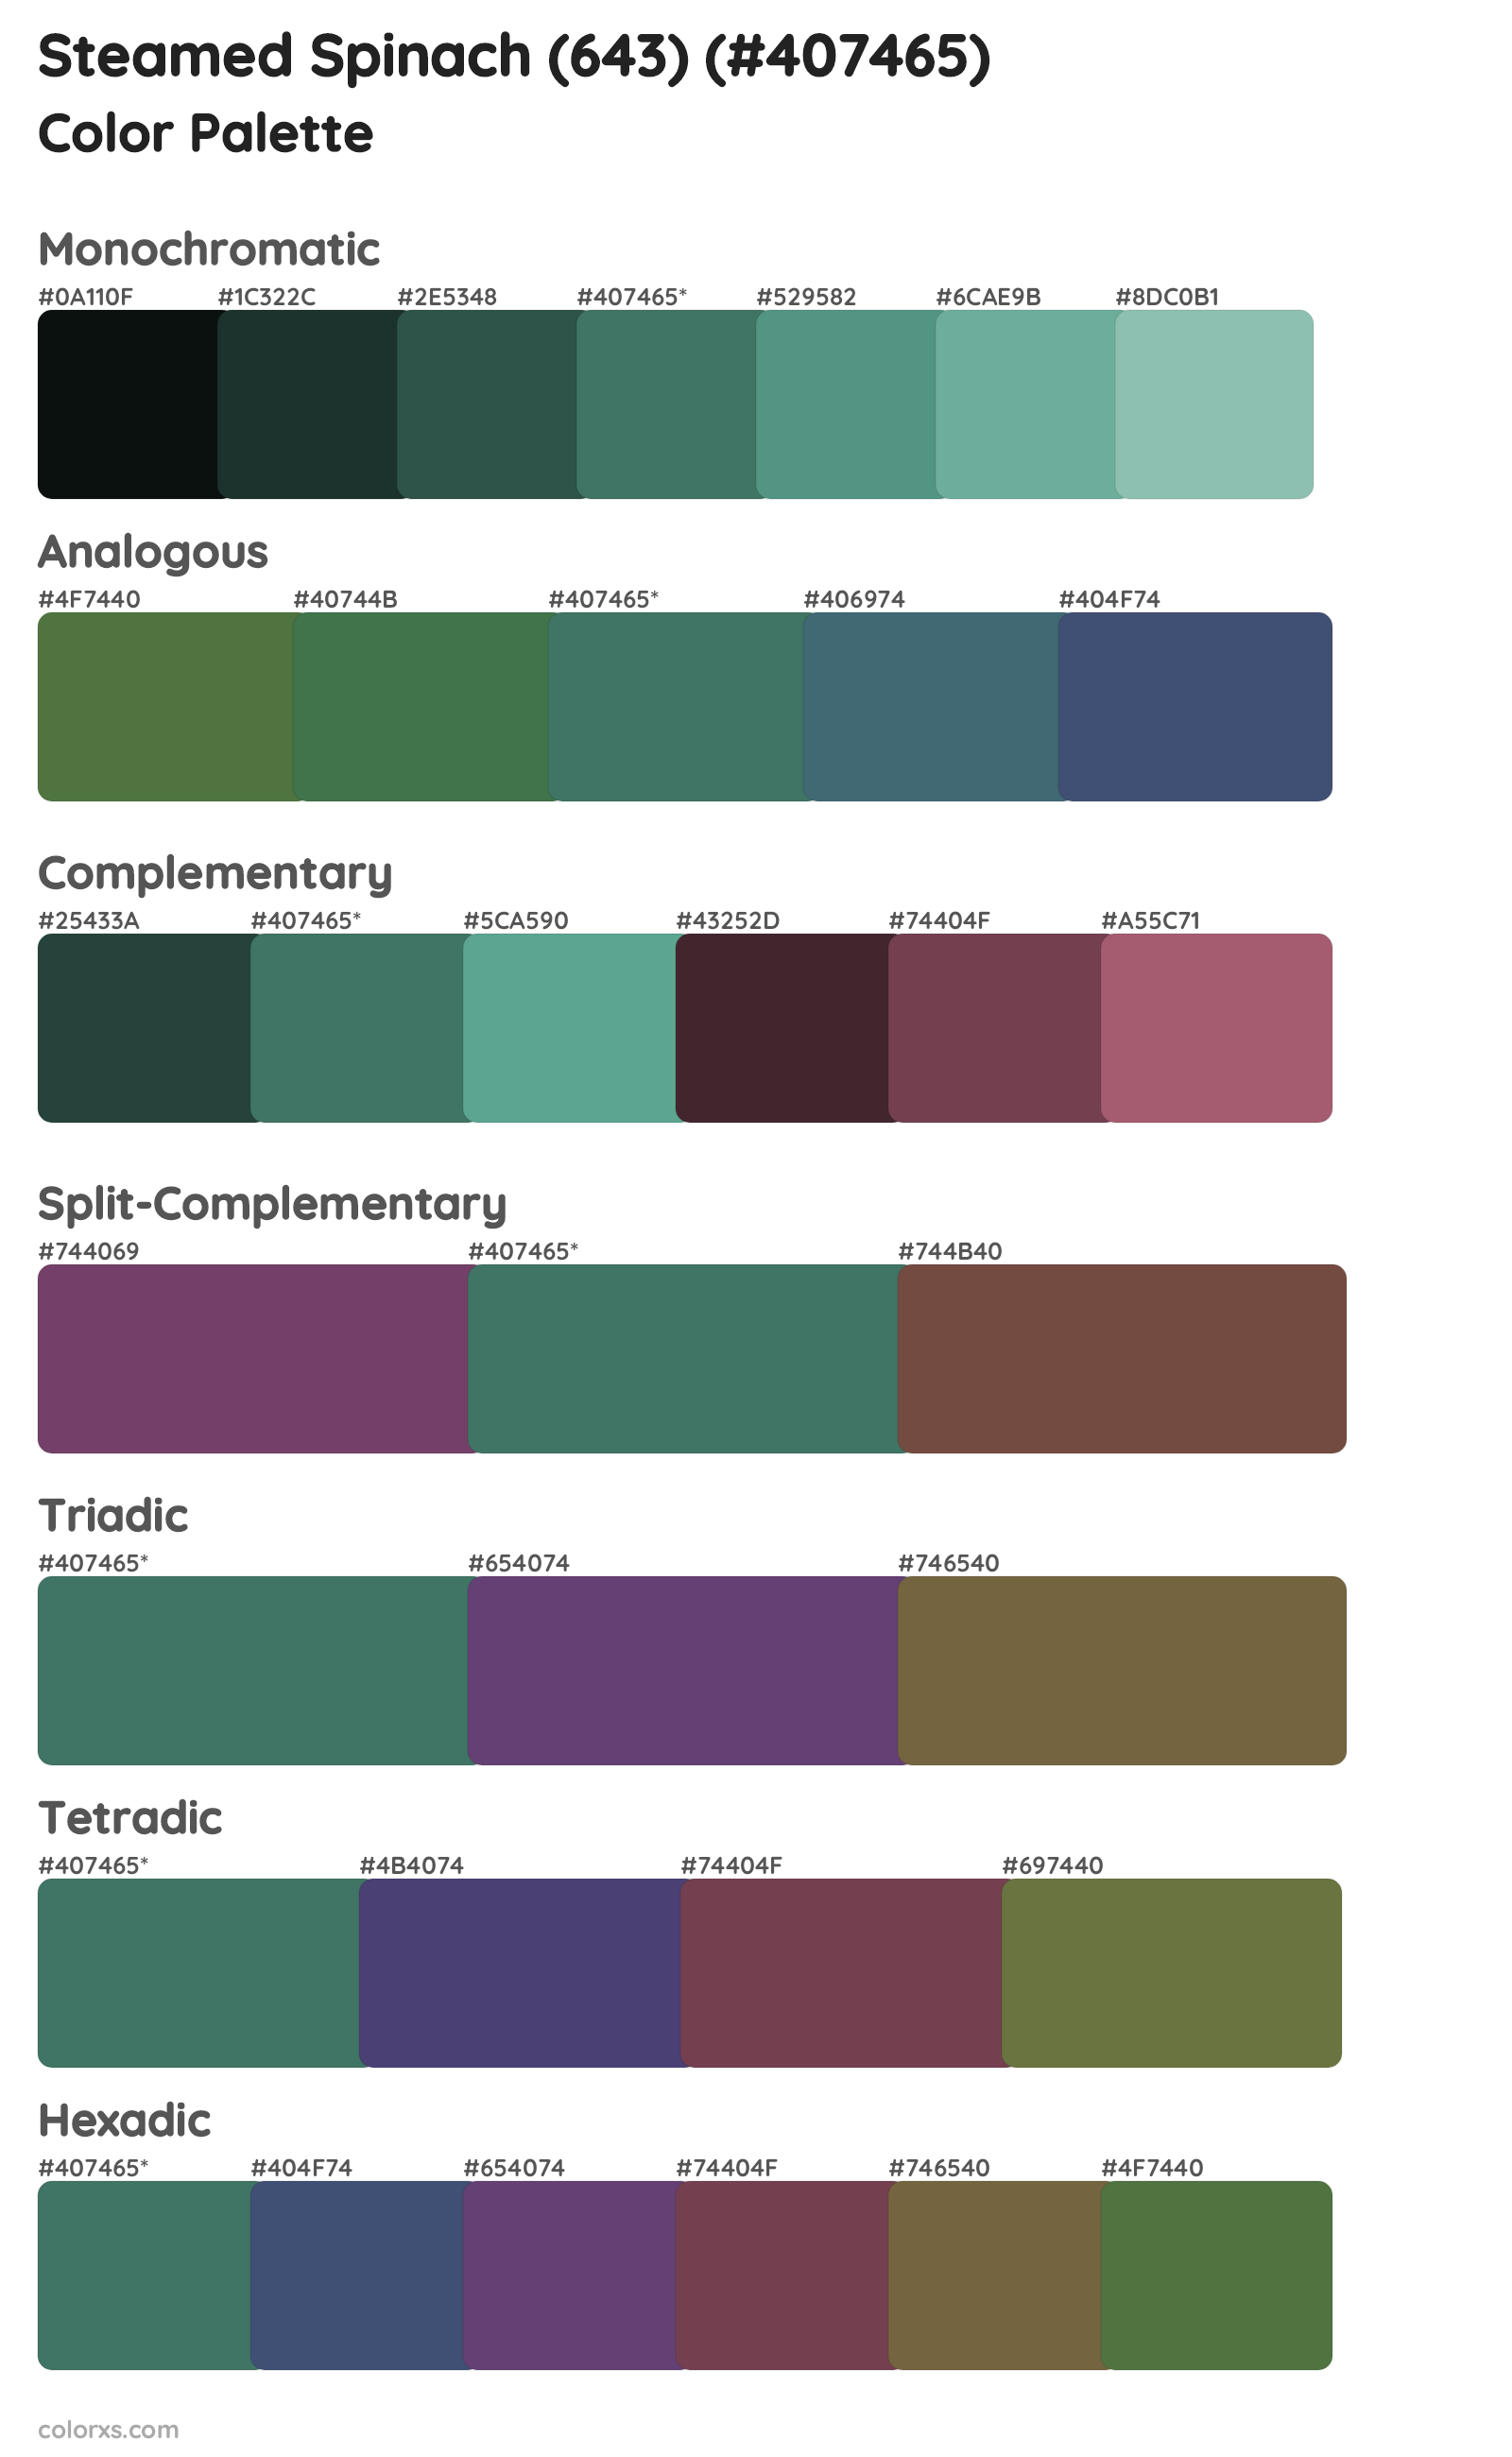 Steamed Spinach (643) Color Scheme Palettes